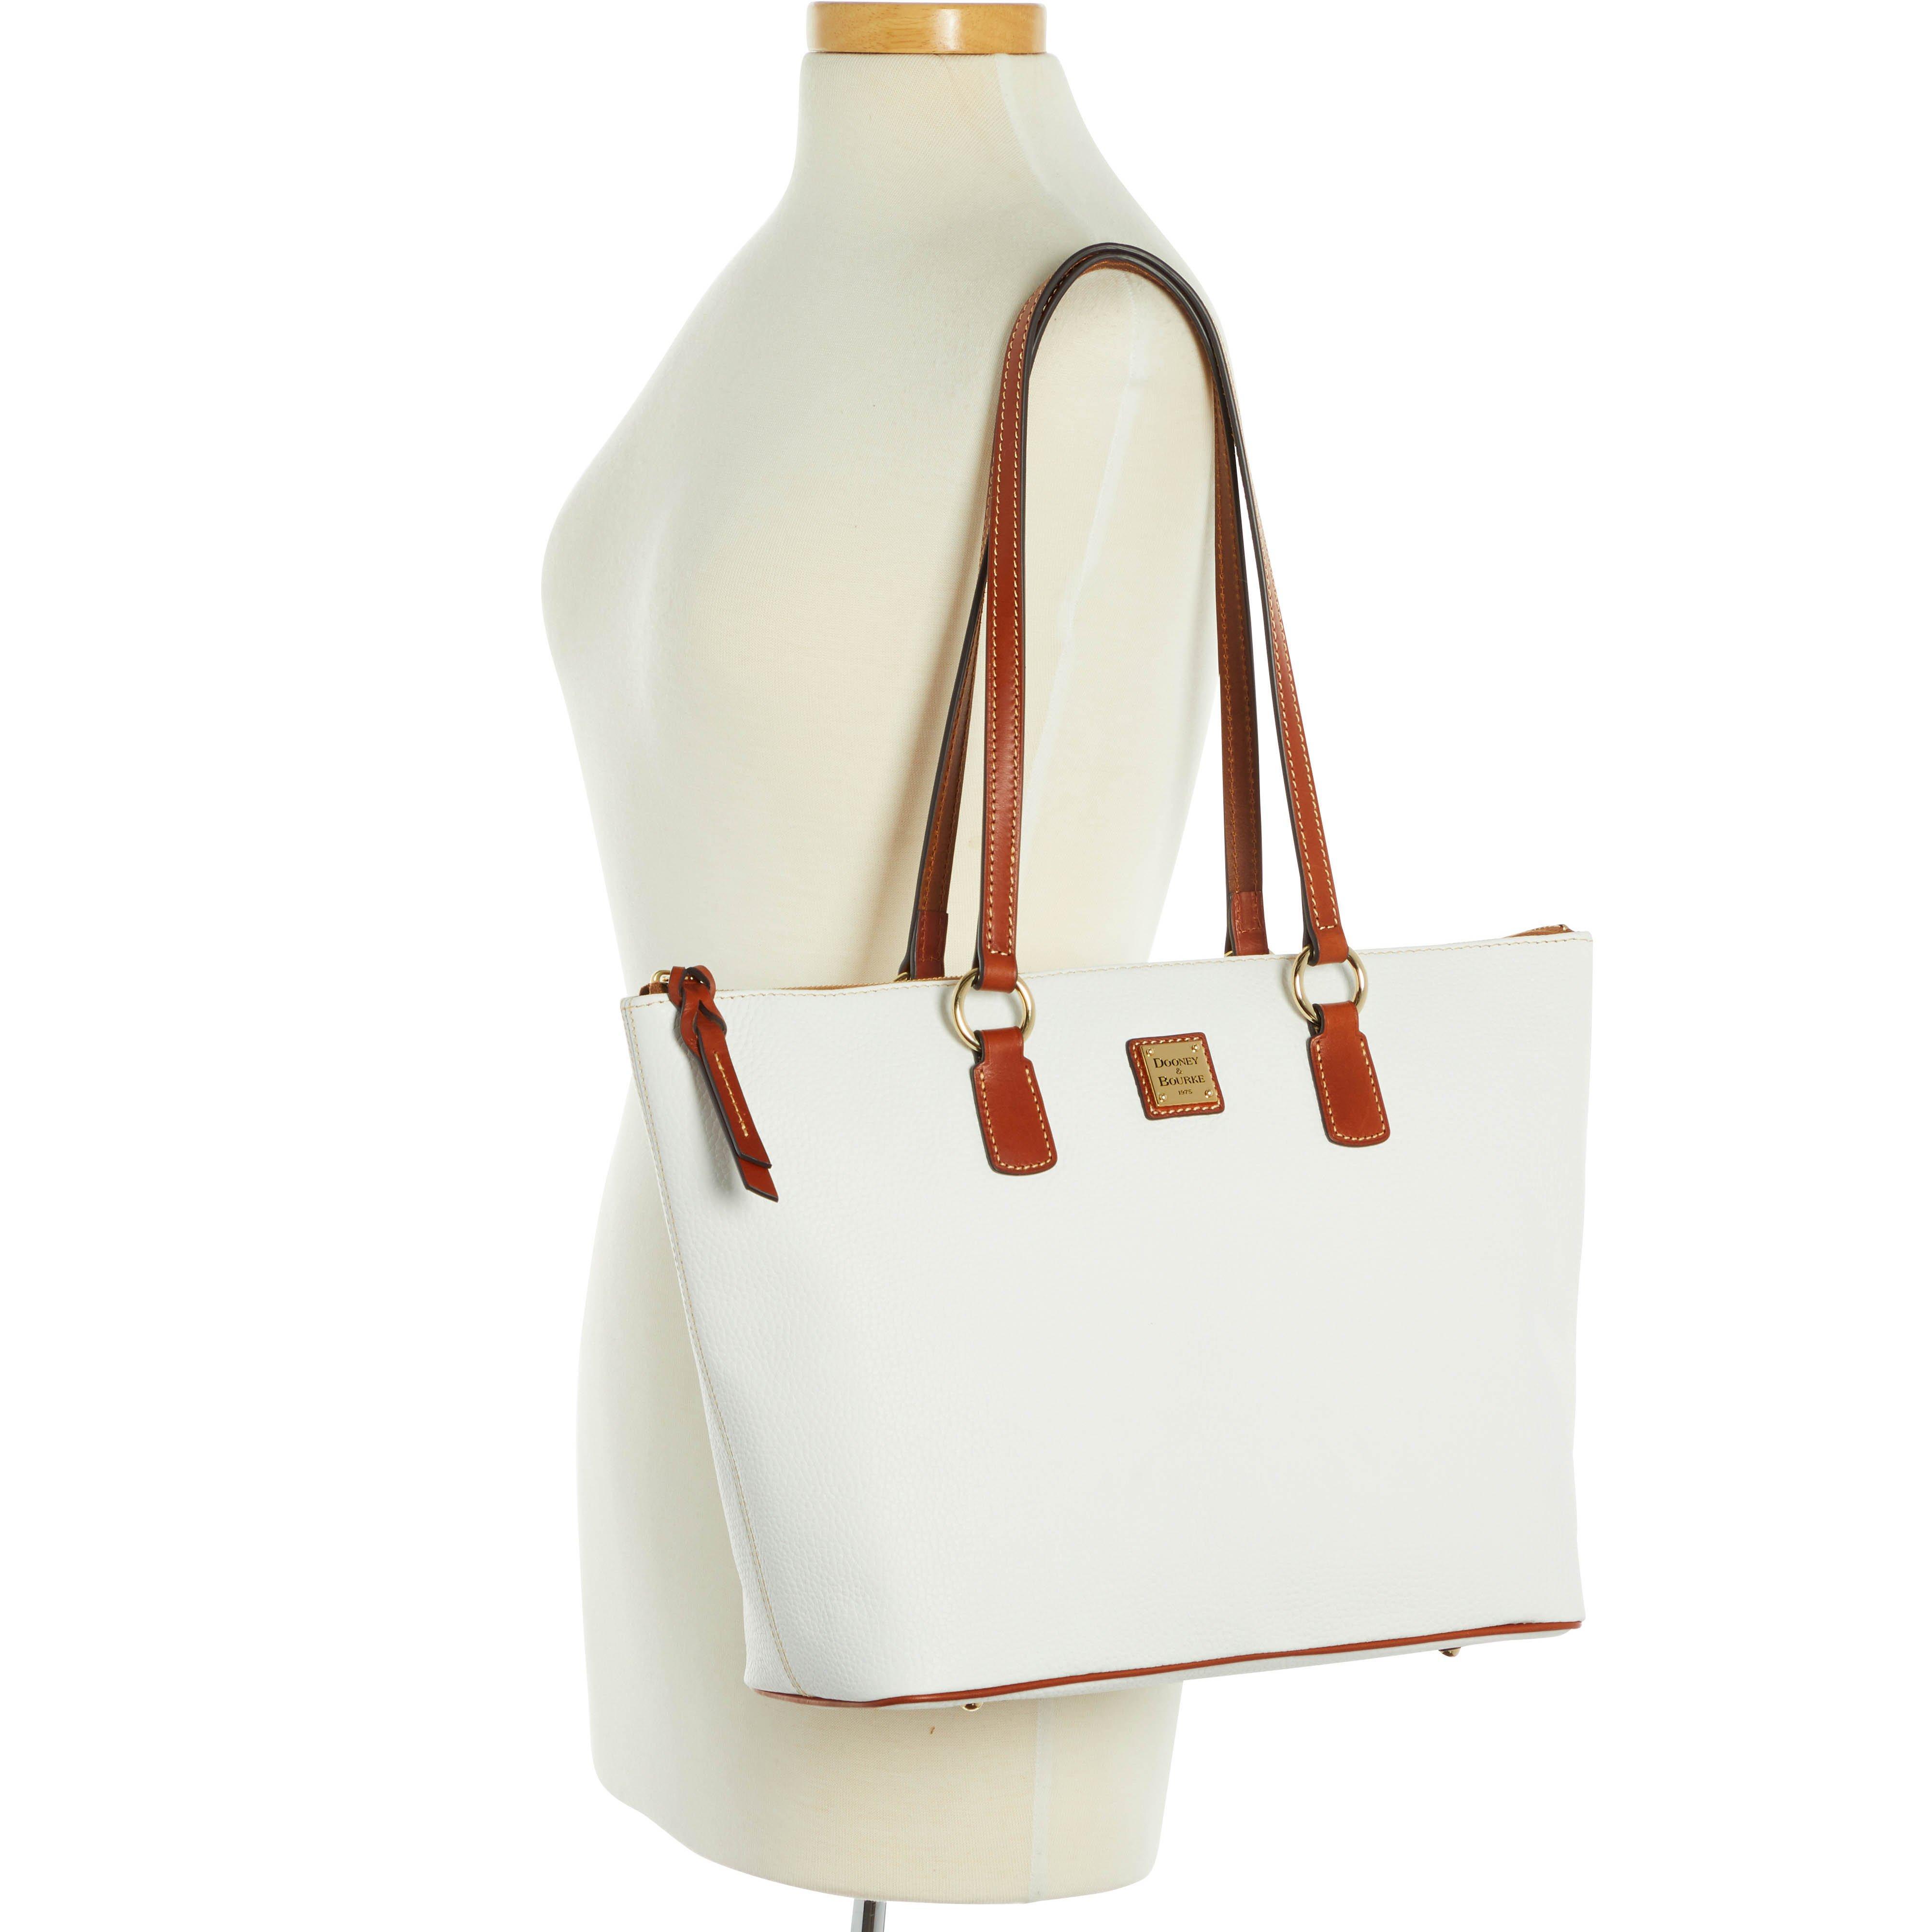 Details about   Dooney & Bourke White Pebble Leather Tote GUC